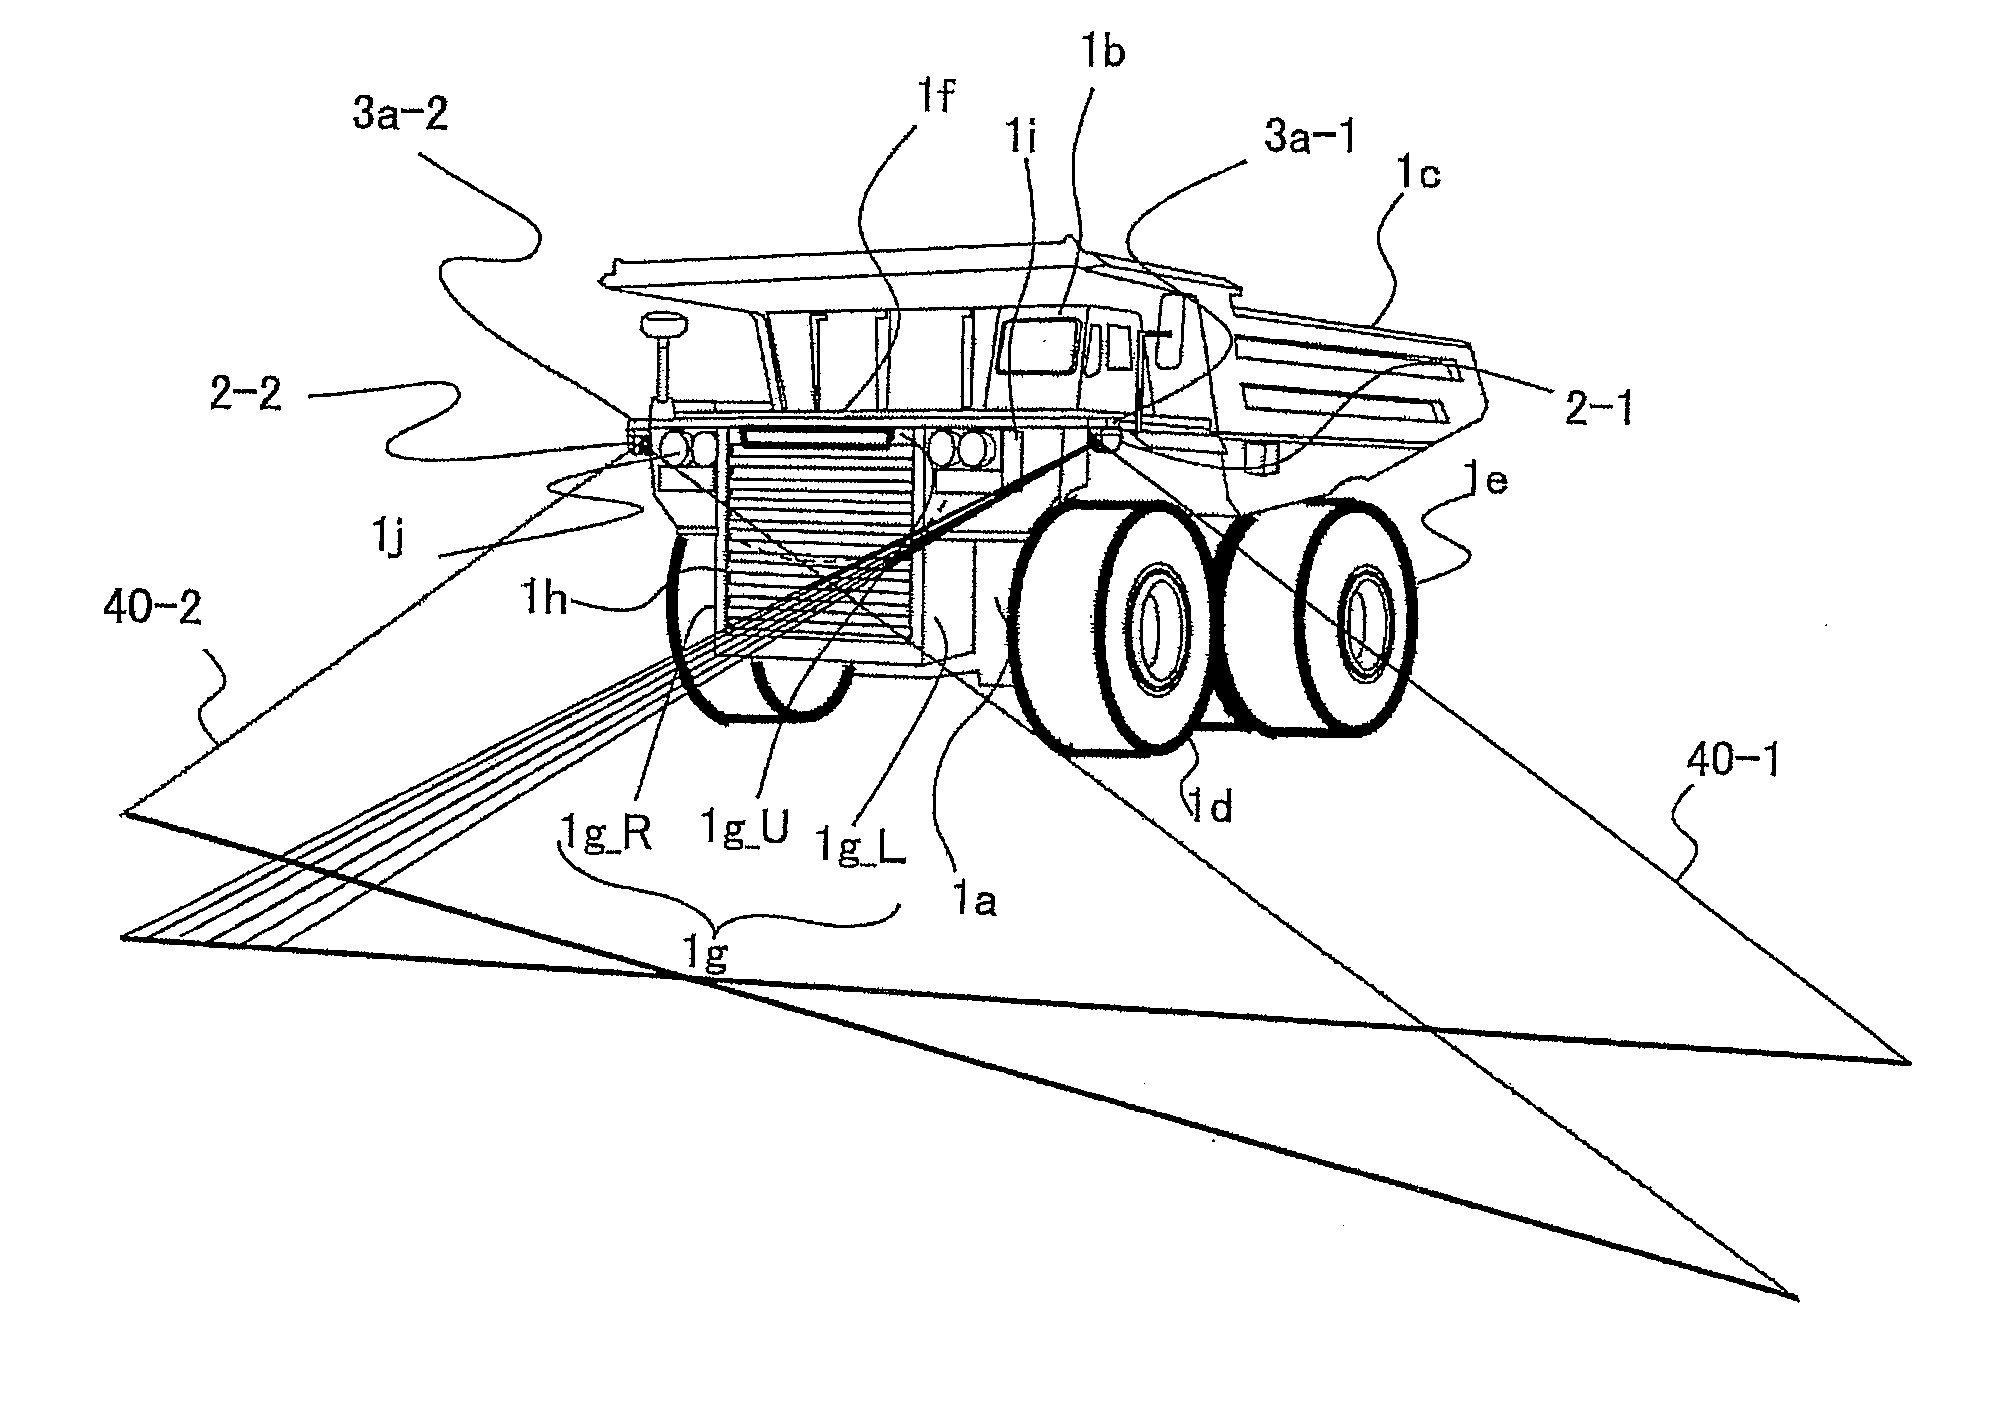 Periphetal object detection system and haulage vehicle